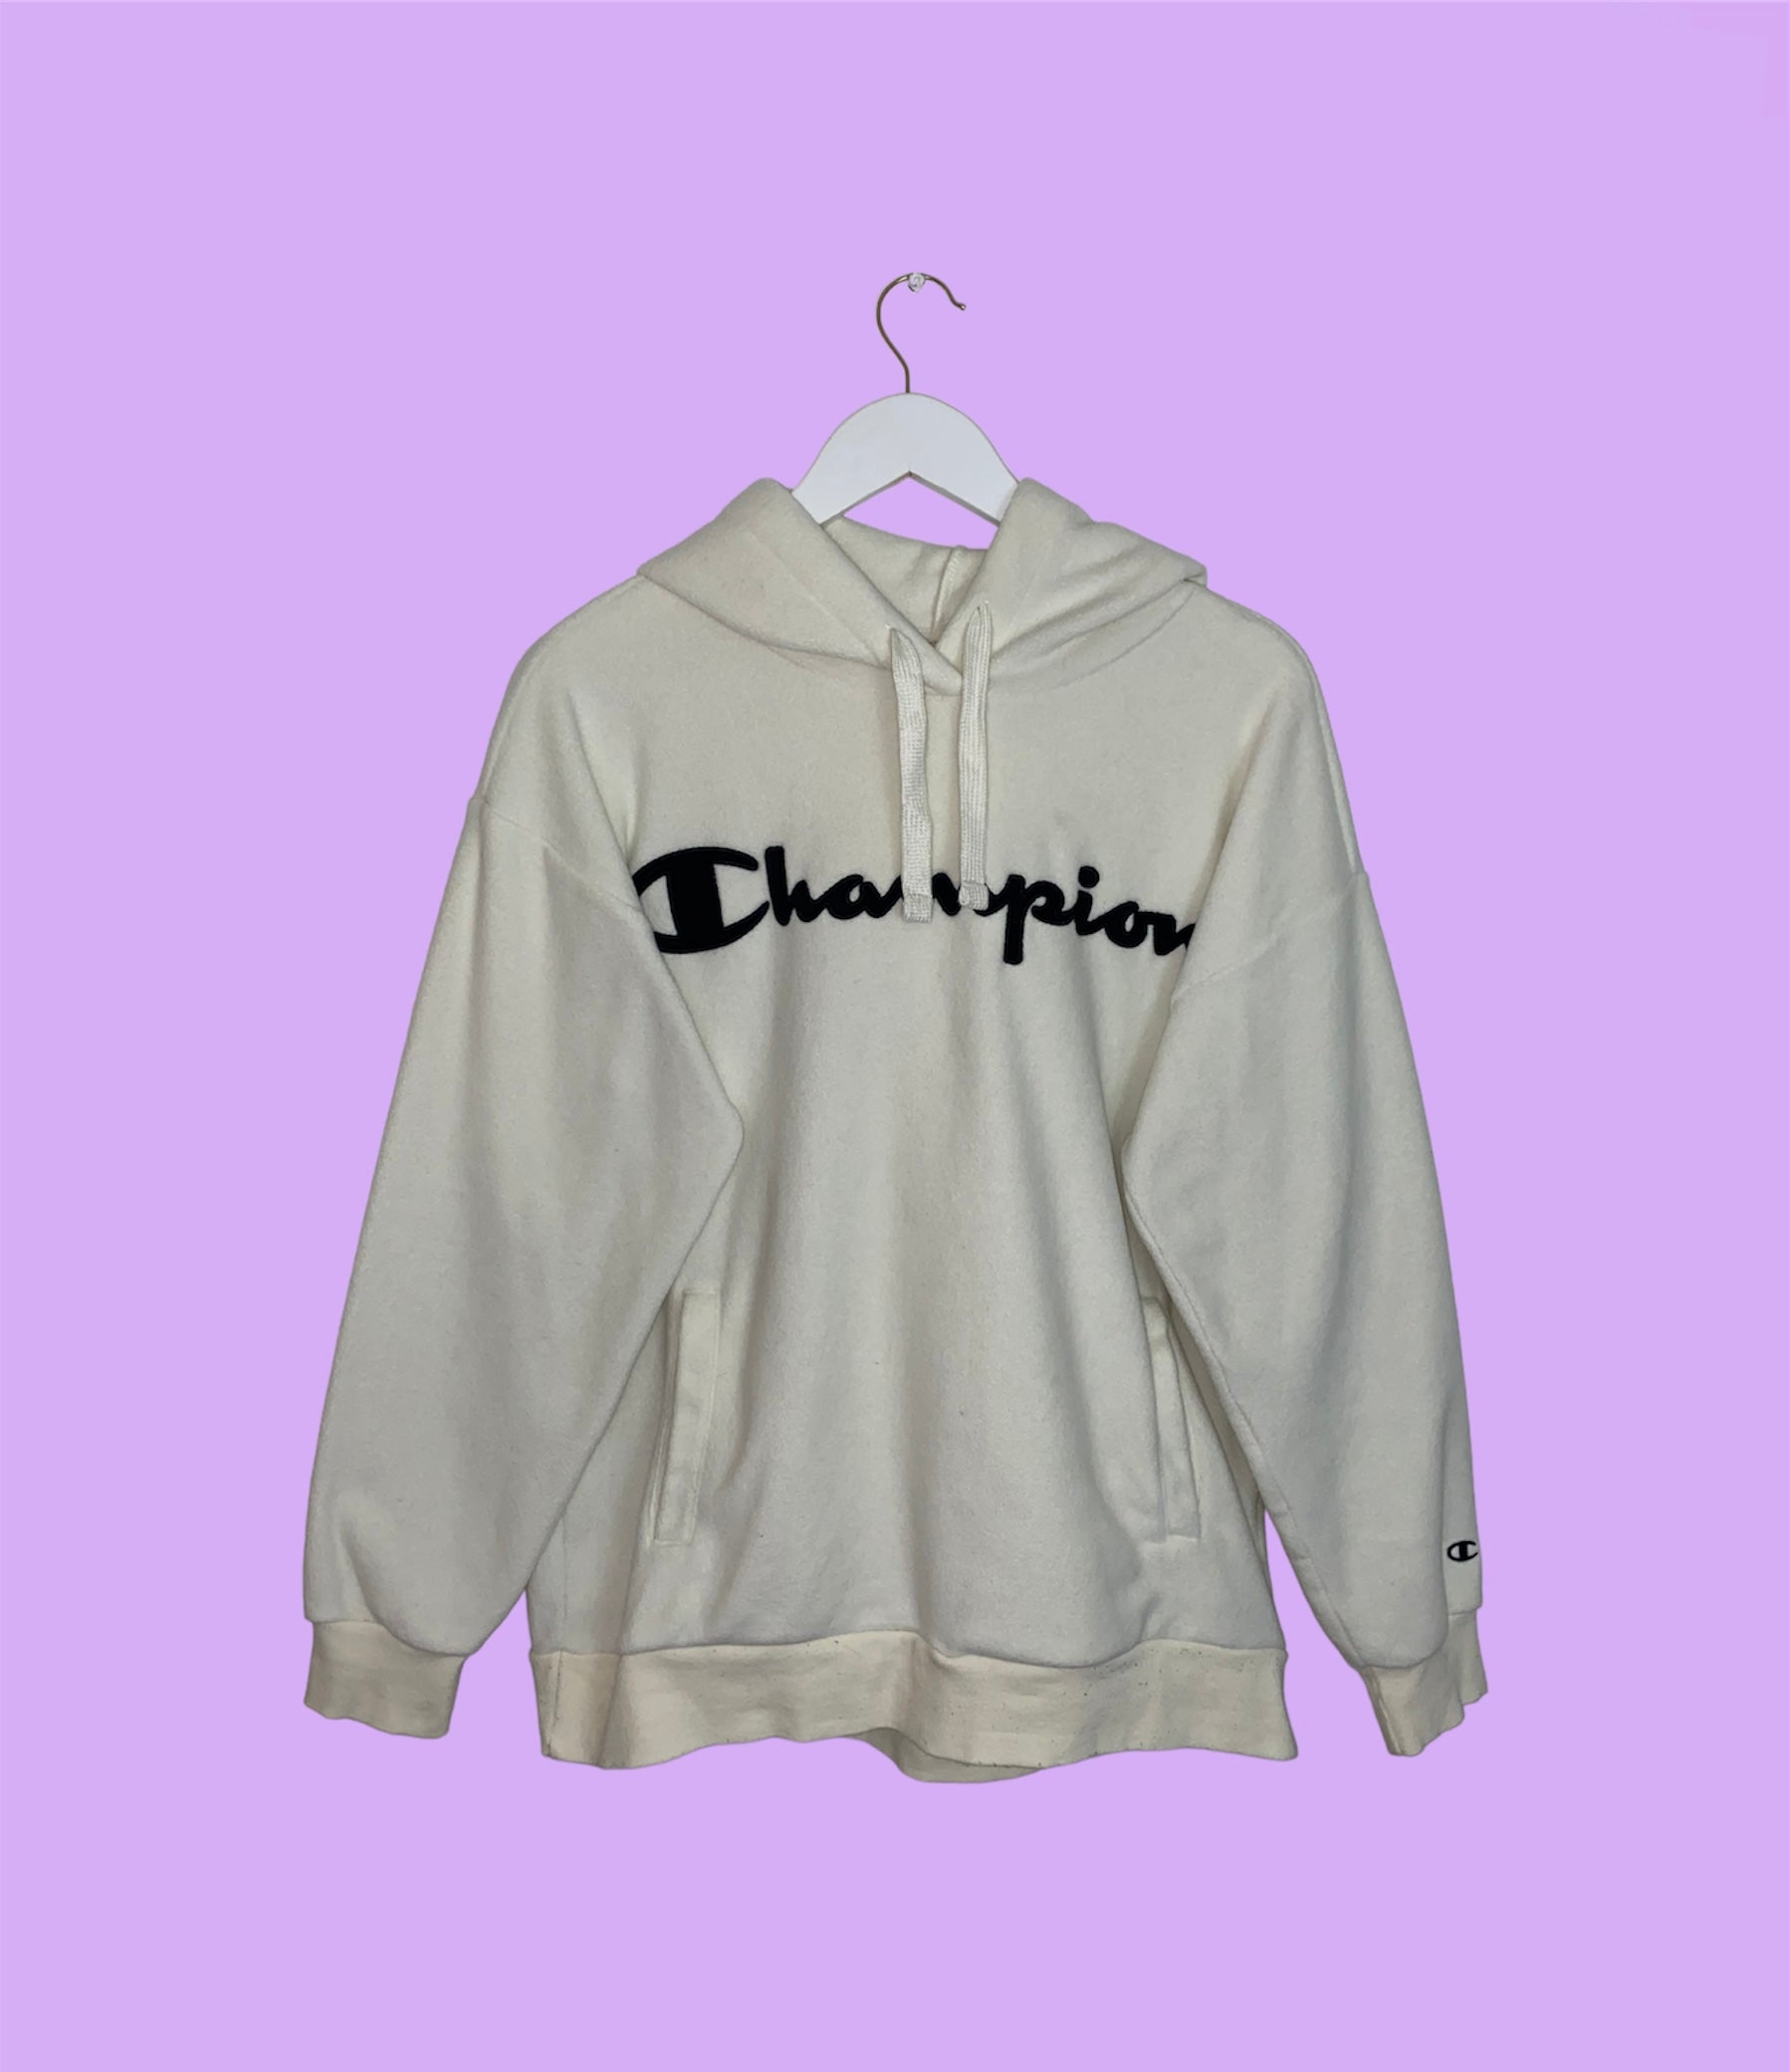 white hoodie with black big text champion logo shown on a lilac background